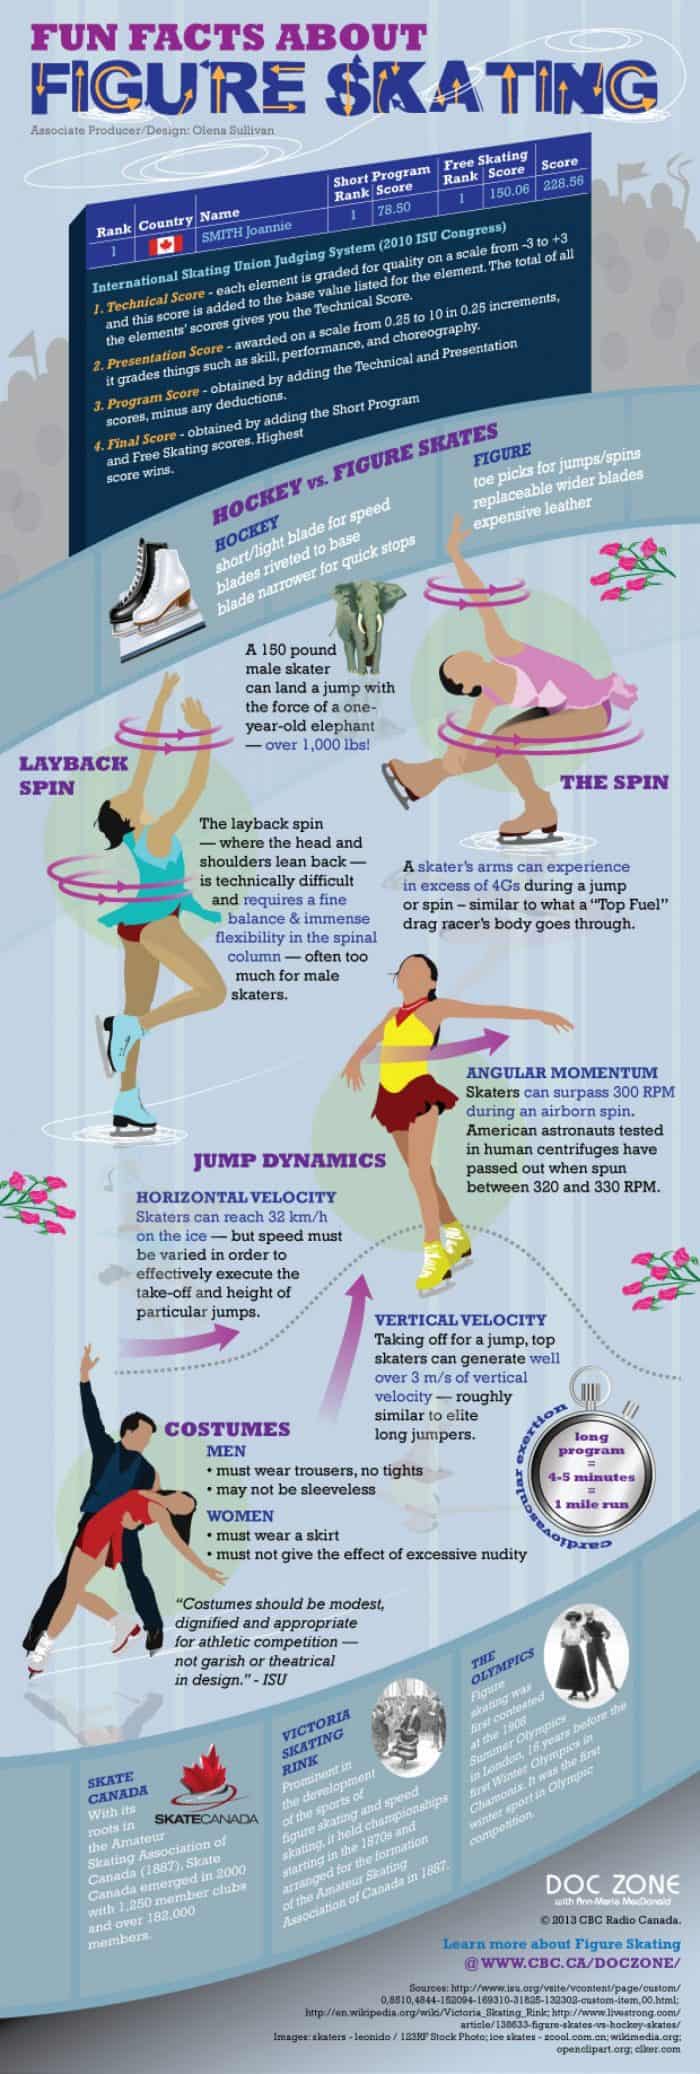 Fun facts about figure skating infographic